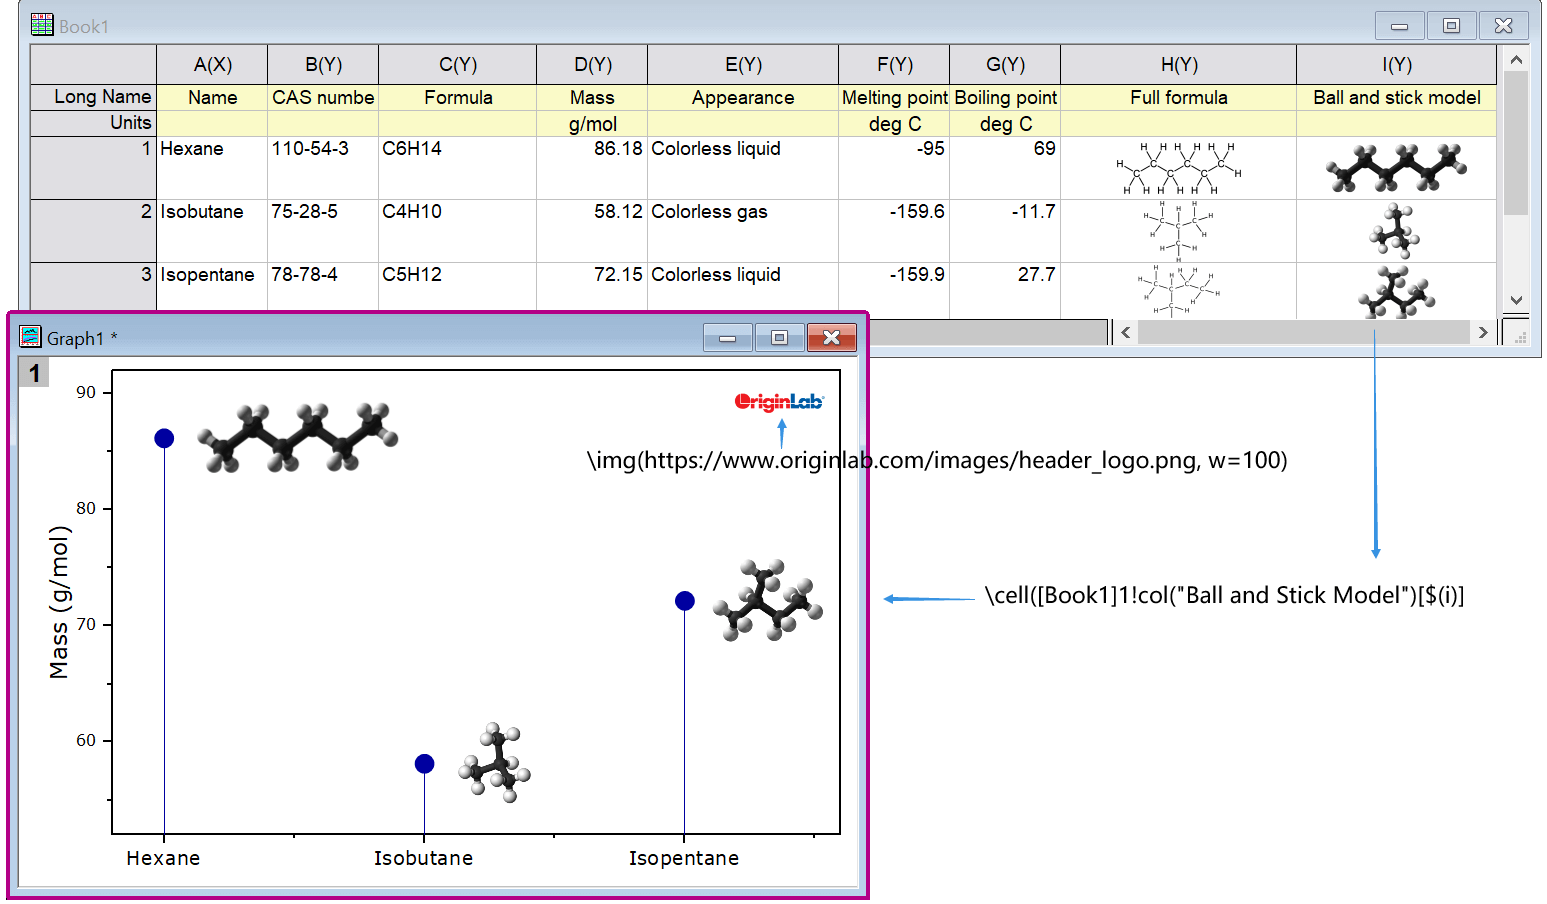 OriginPro 2022b: Use the new \img(notation) to link online image into graph labels. Use the new \cell(notation) to insert images embedded in worksheet cells into graph labels.